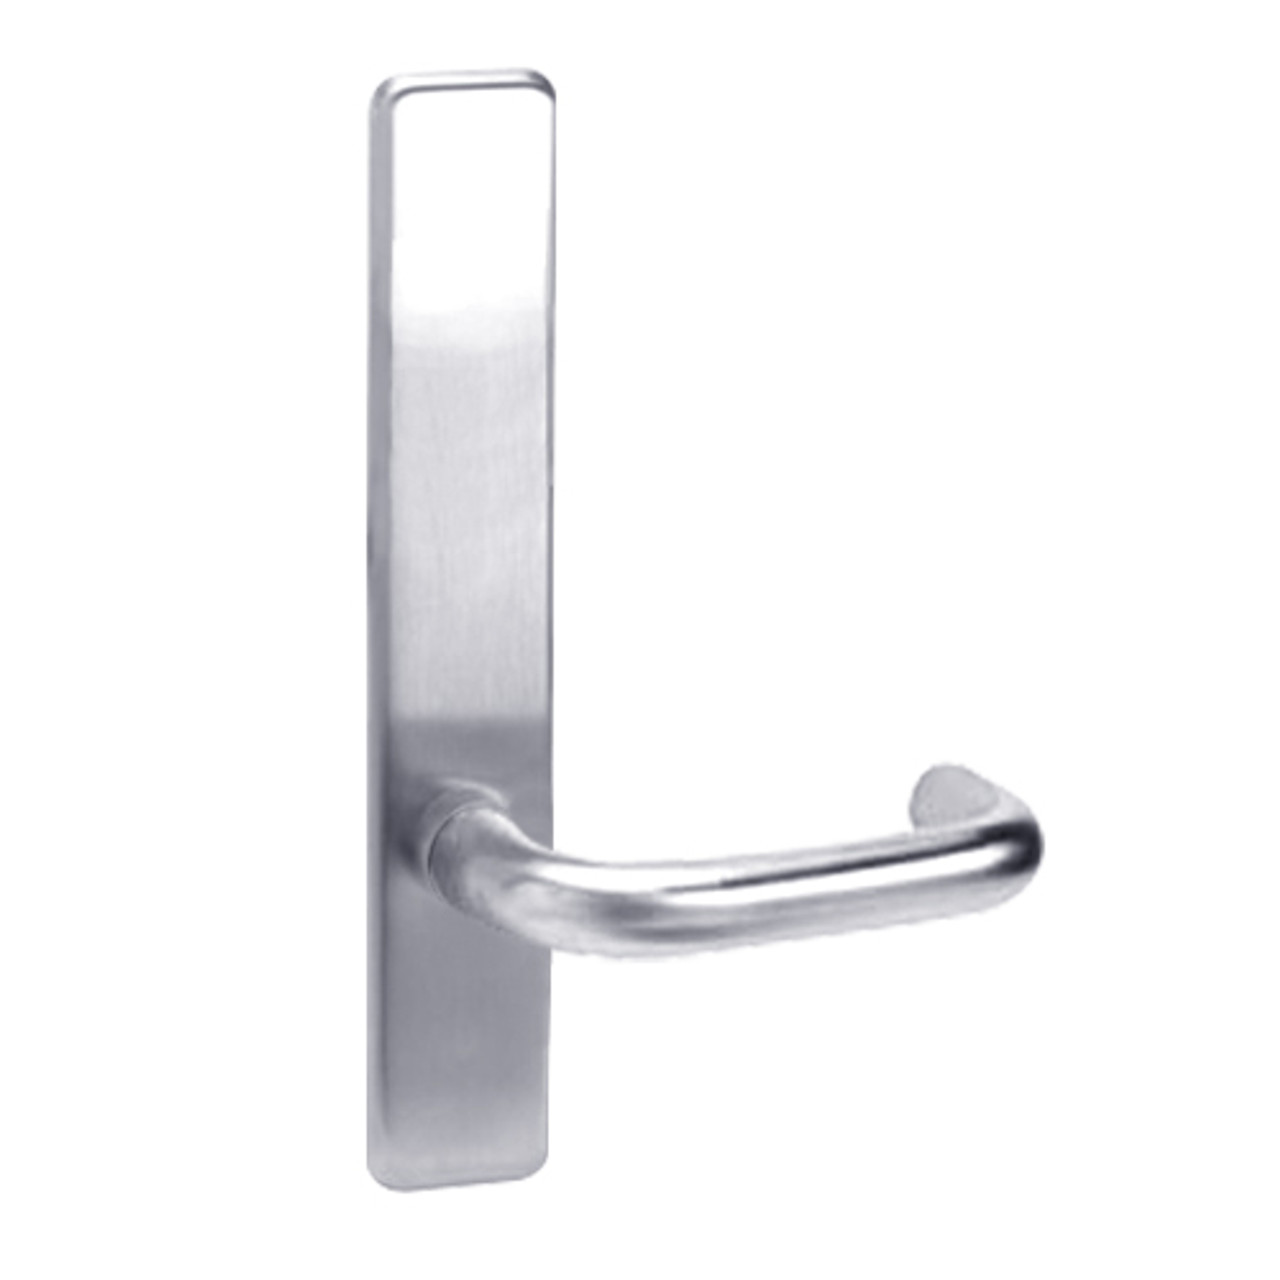 L855-625-LHR Corbin ED4000 Series Exit Device Trim with Classroom Lustra Lever in Bright Chrome Finish